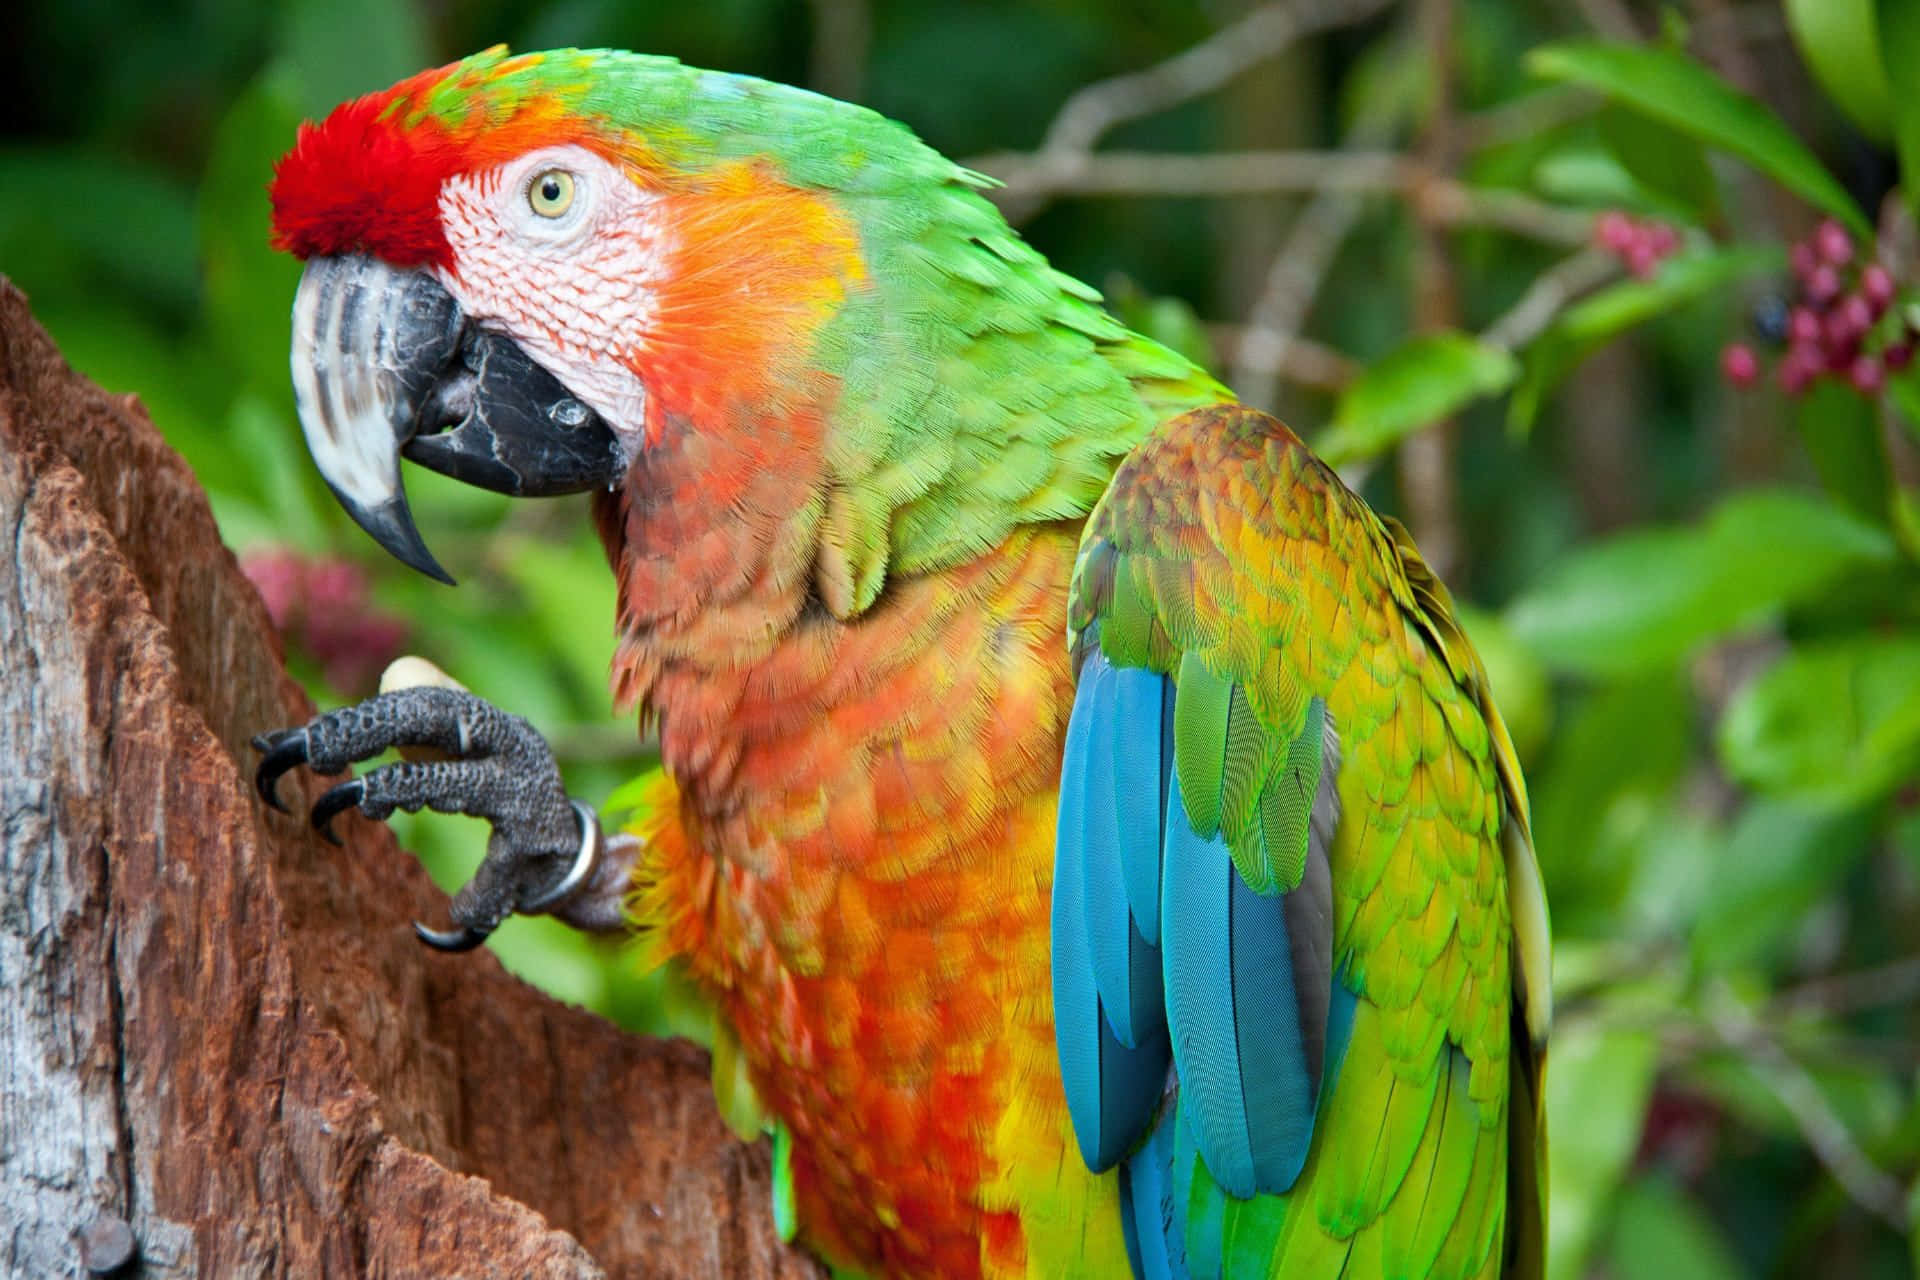 A vibrant green parrot perched upon a branch